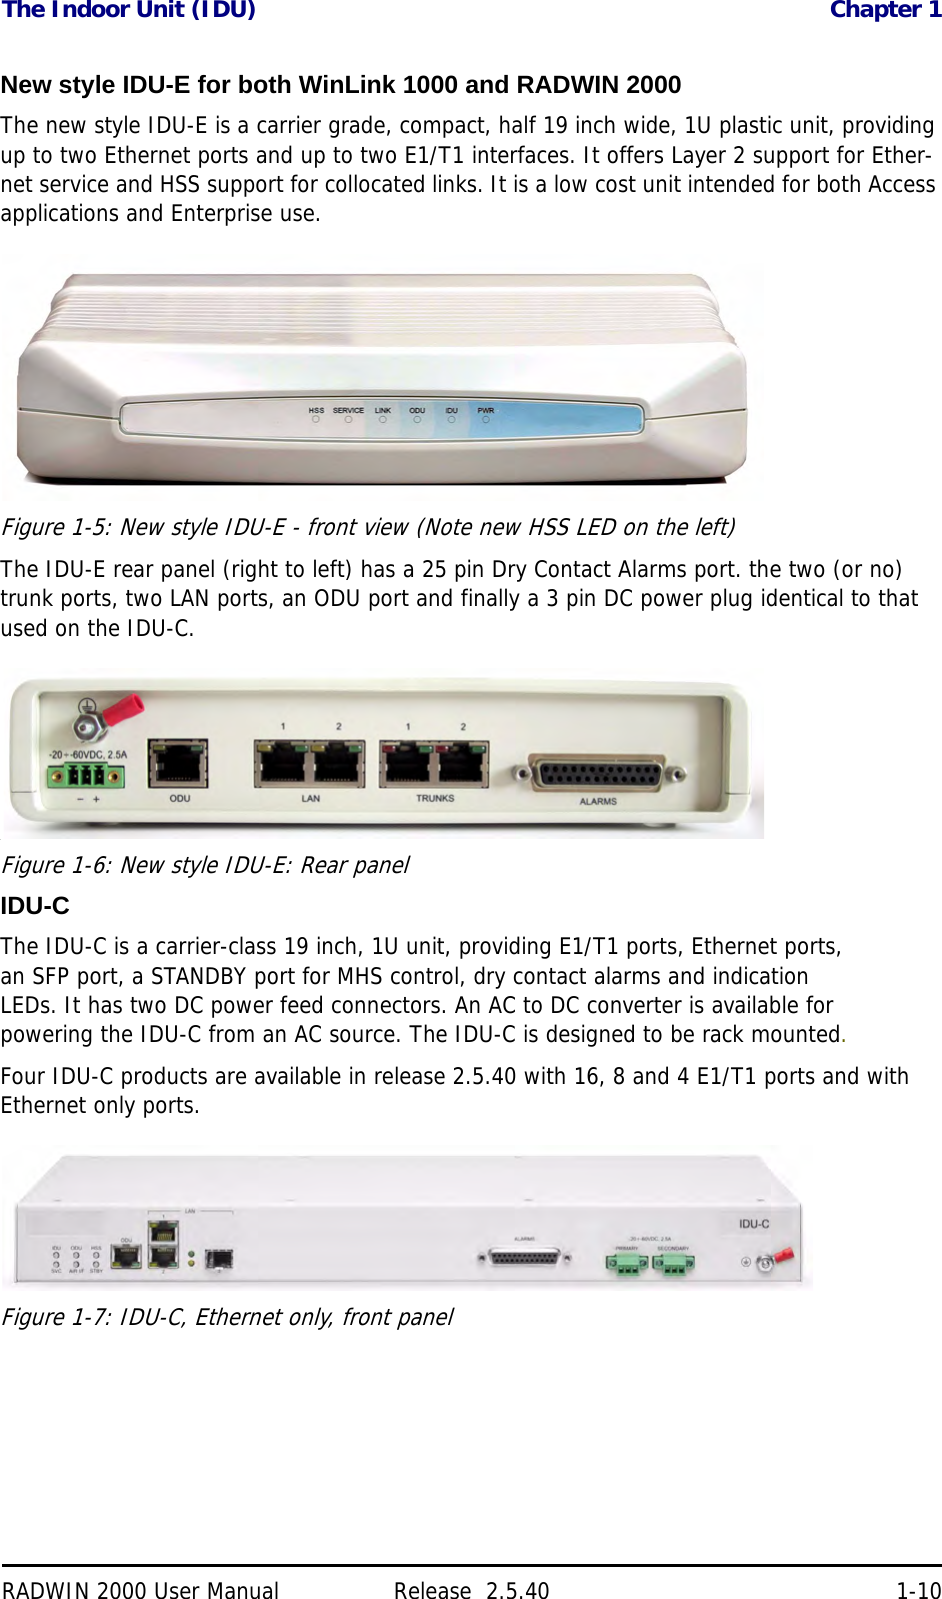 The Indoor Unit (IDU) Chapter 1RADWIN 2000 User Manual Release  2.5.40 1-10New style IDU-E for both WinLink 1000 and RADWIN 2000The new style IDU-E is a carrier grade, compact, half 19 inch wide, 1U plastic unit, providing up to two Ethernet ports and up to two E1/T1 interfaces. It offers Layer 2 support for Ether-net service and HSS support for collocated links. It is a low cost unit intended for both Access applications and Enterprise use.Figure 1-5: New style IDU-E - front view (Note new HSS LED on the left)The IDU-E rear panel (right to left) has a 25 pin Dry Contact Alarms port. the two (or no) trunk ports, two LAN ports, an ODU port and finally a 3 pin DC power plug identical to that used on the IDU-C..Figure 1-6: New style IDU-E: Rear panel IDU-CThe IDU-C is a carrier-class 19 inch, 1U unit, providing E1/T1 ports, Ethernet ports, an SFP port, a STANDBY port for MHS control, dry contact alarms and indication LEDs. It has two DC power feed connectors. An AC to DC converter is available for powering the IDU-C from an AC source. The IDU-C is designed to be rack mounted.Four IDU-C products are available in release 2.5.40 with 16, 8 and 4 E1/T1 ports and with Ethernet only ports.Figure 1-7: IDU-C, Ethernet only, front panel